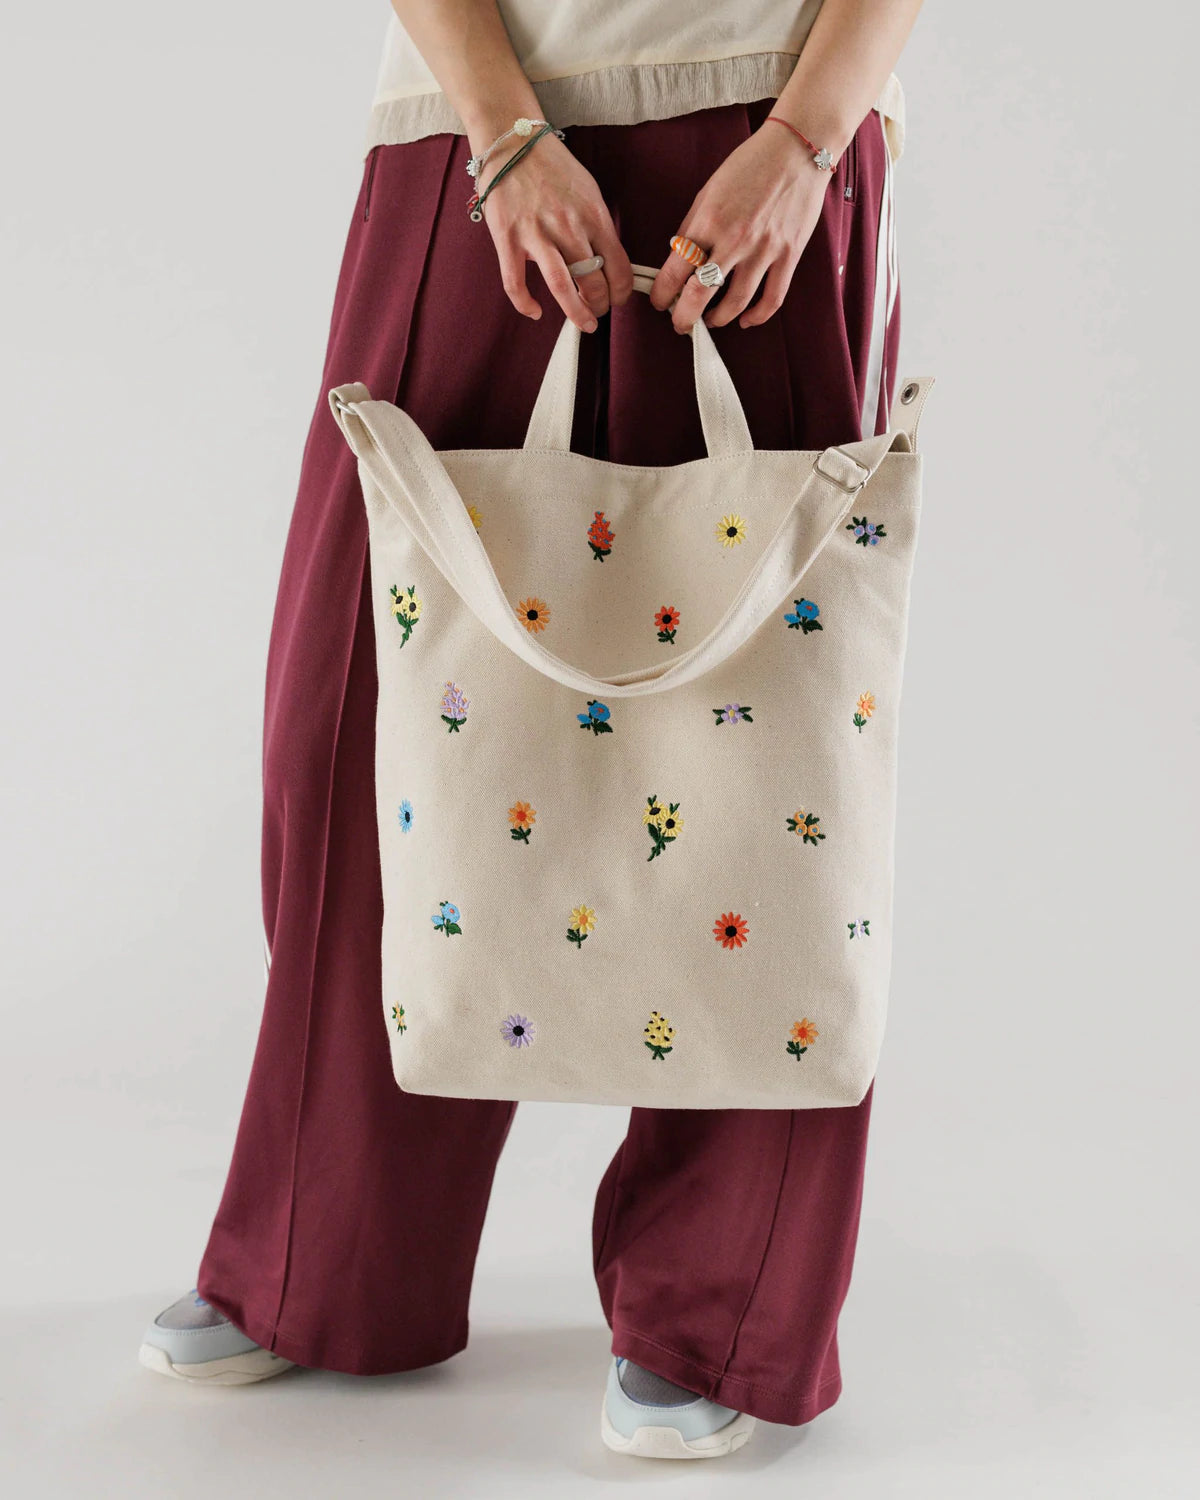 The Embroidered Ditsy Floral Duck Bag by Baggu